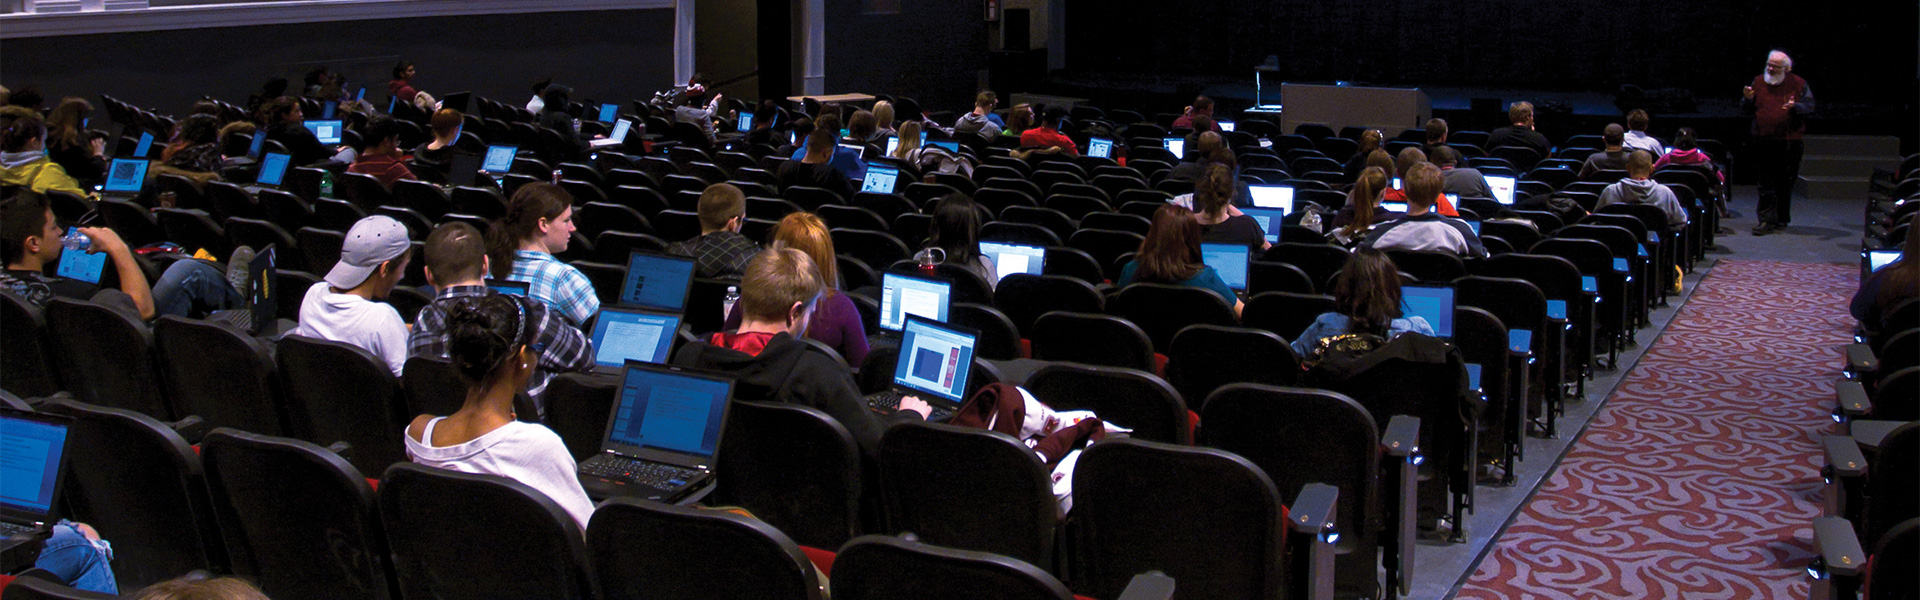 Students in the Regent Theatre lecture hall